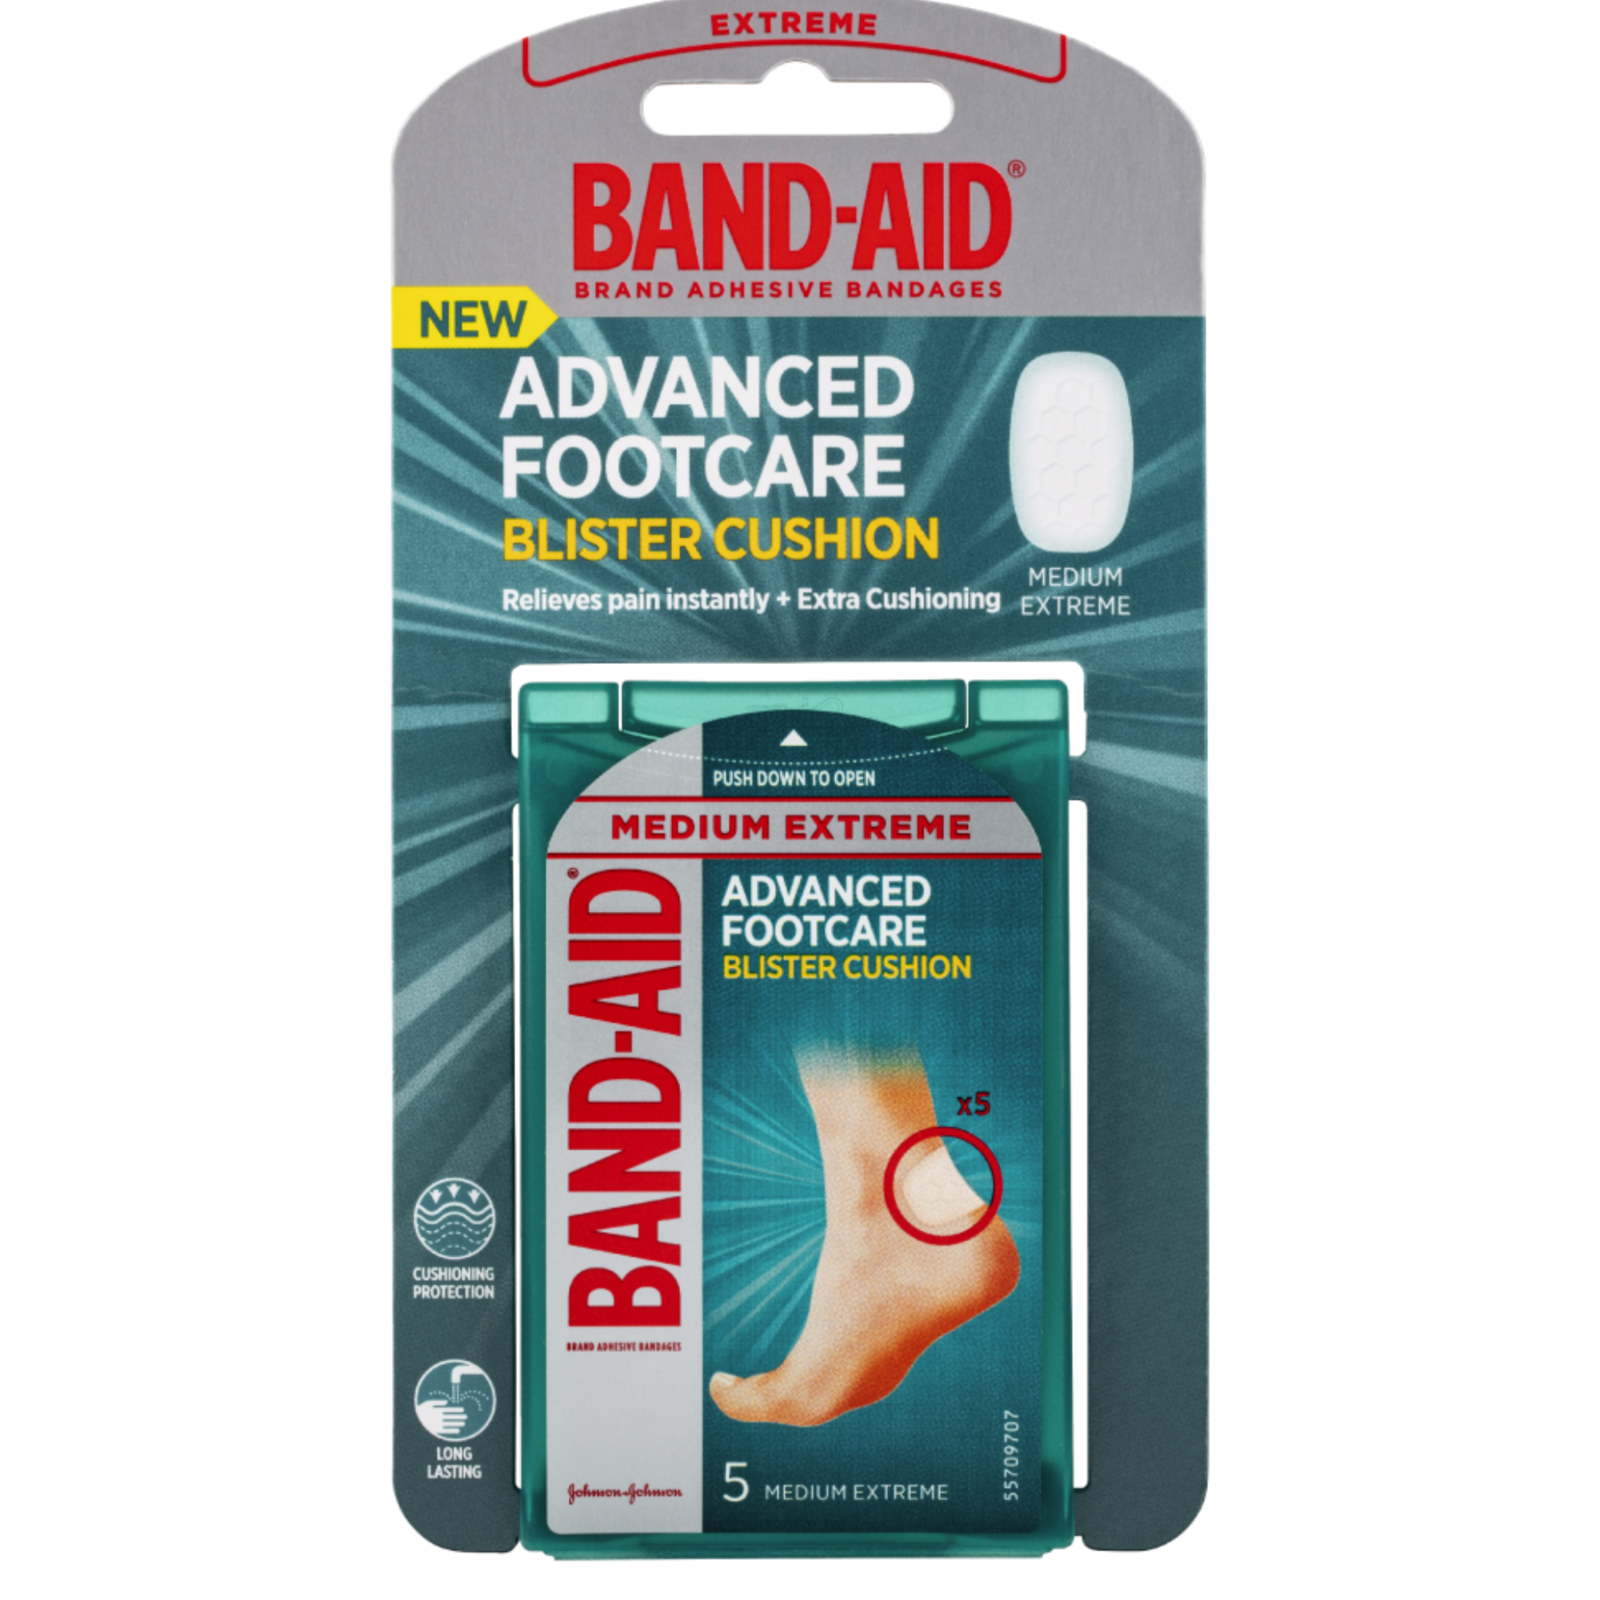 Band-Aid Advanced Footcare Blister Cushions in the 5 Medium Extreme - $78.13